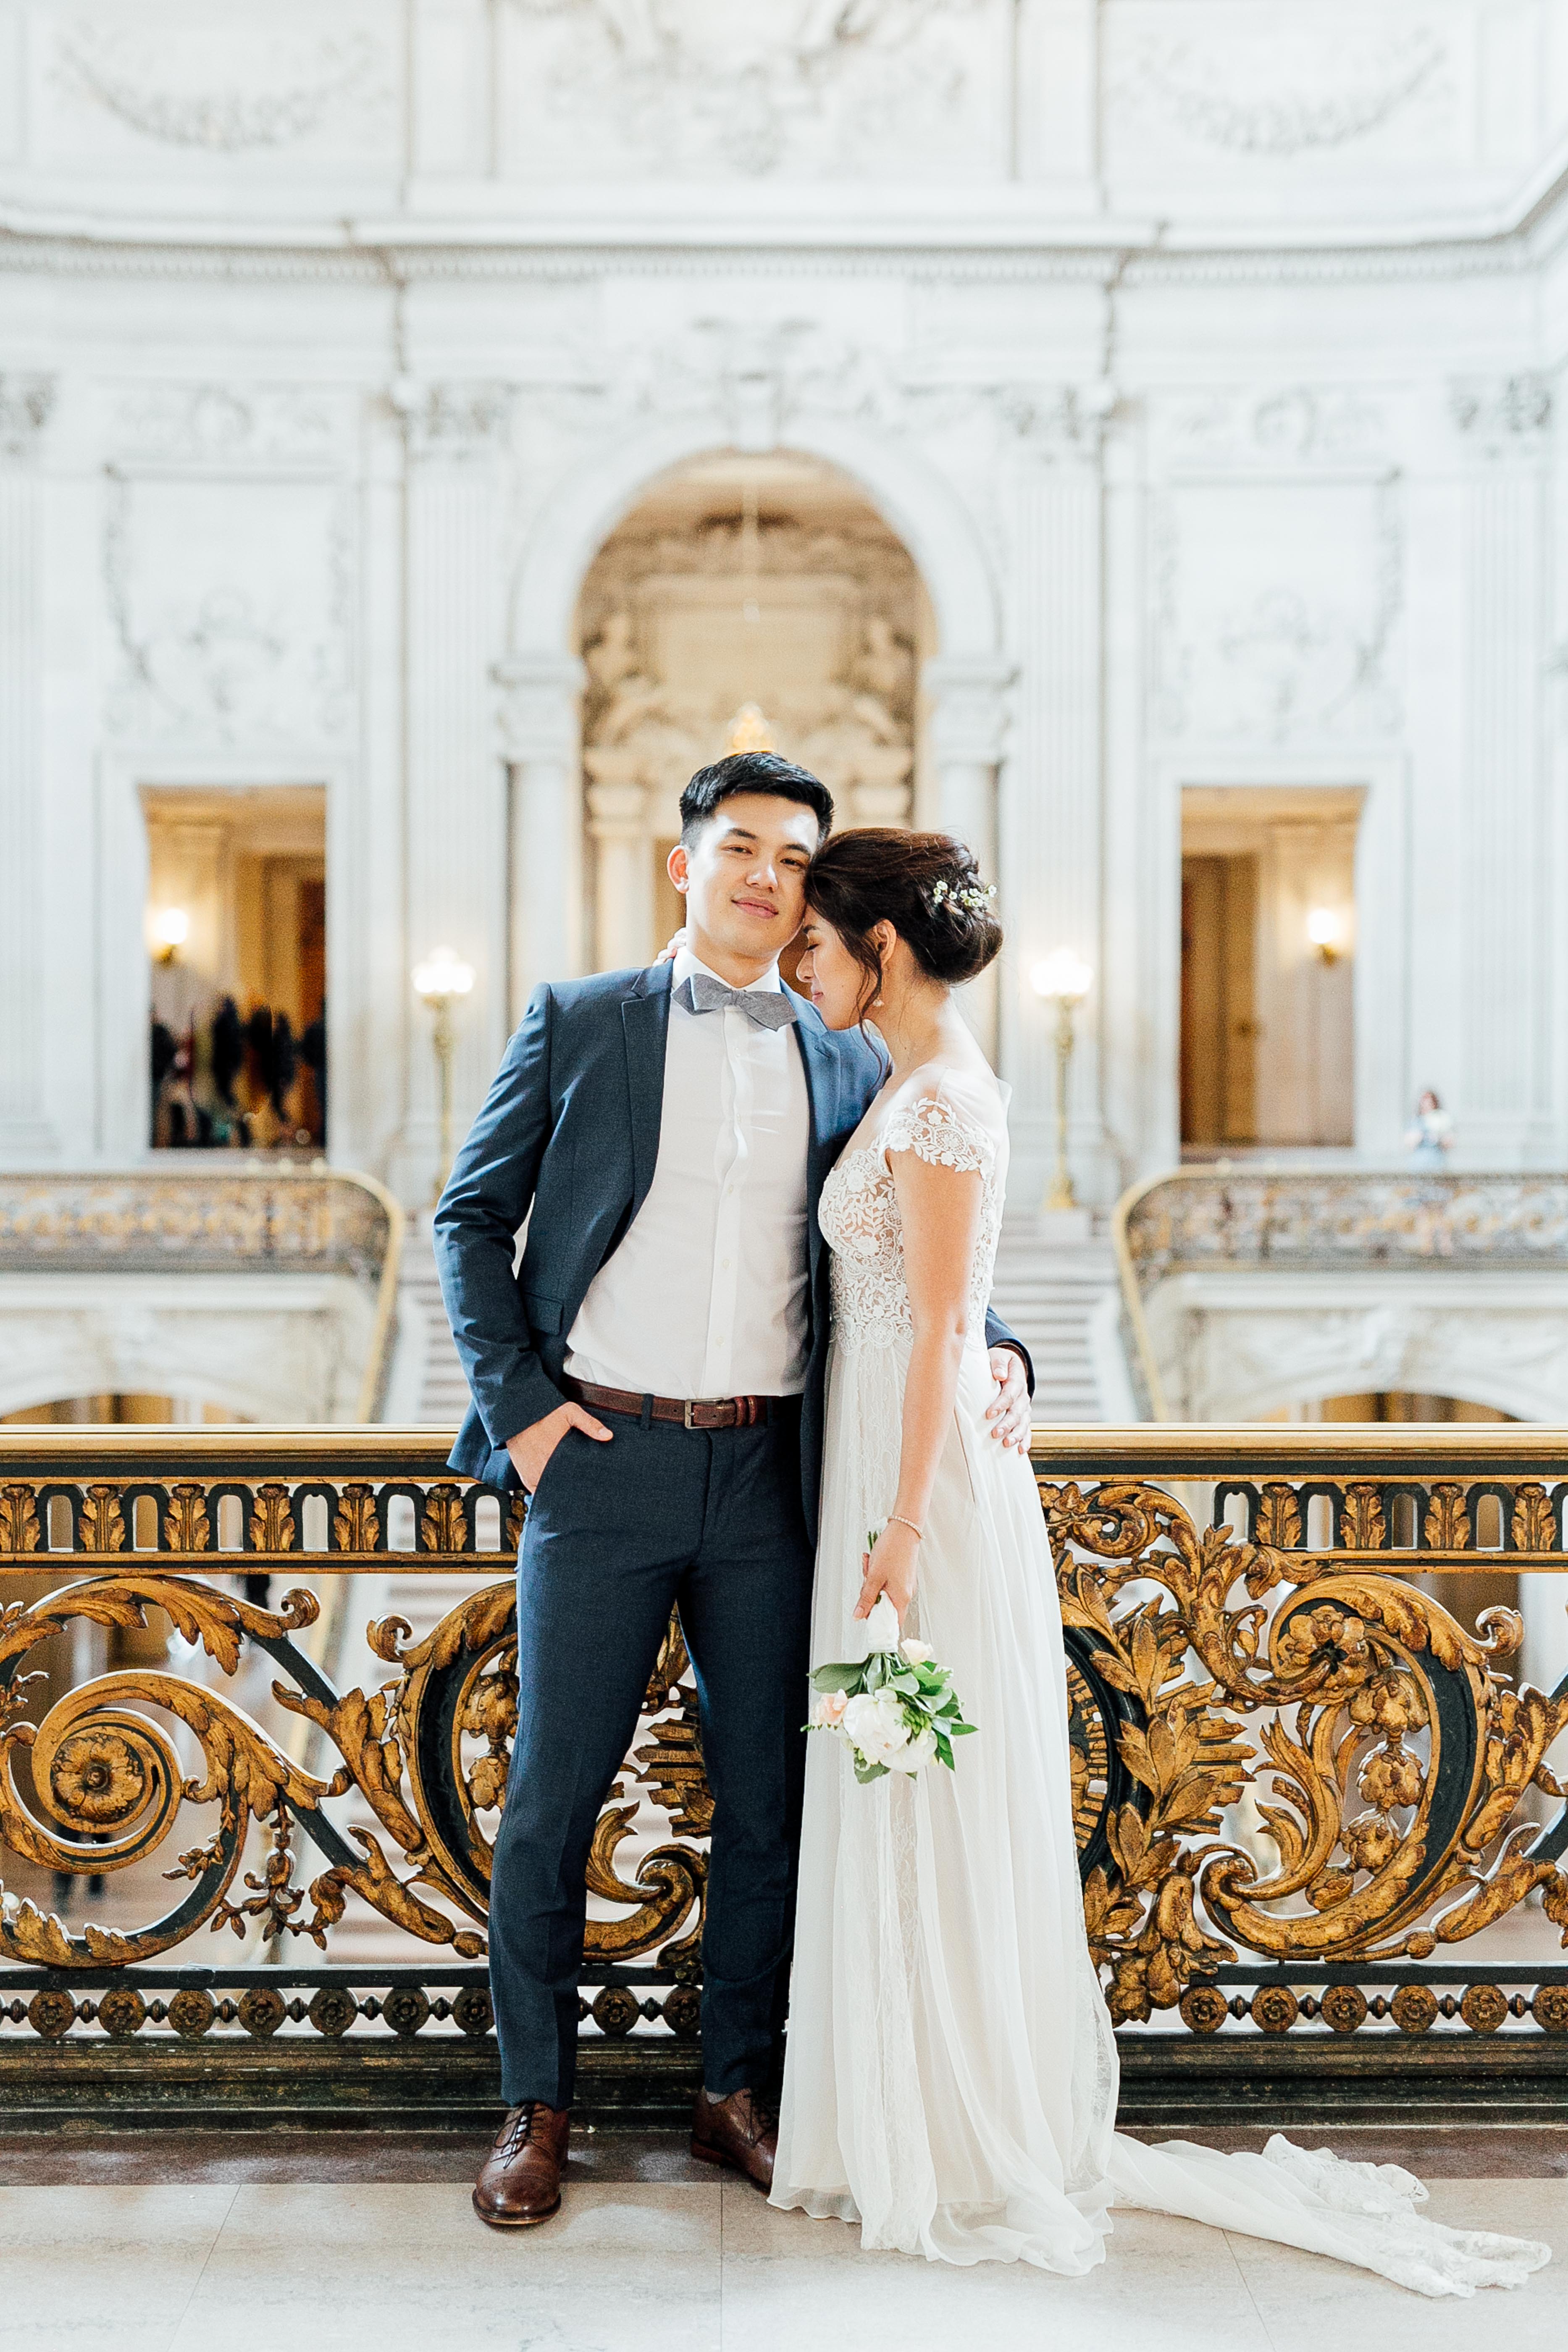 Bride and groom stand on balcony in front of elegant City Hall interior